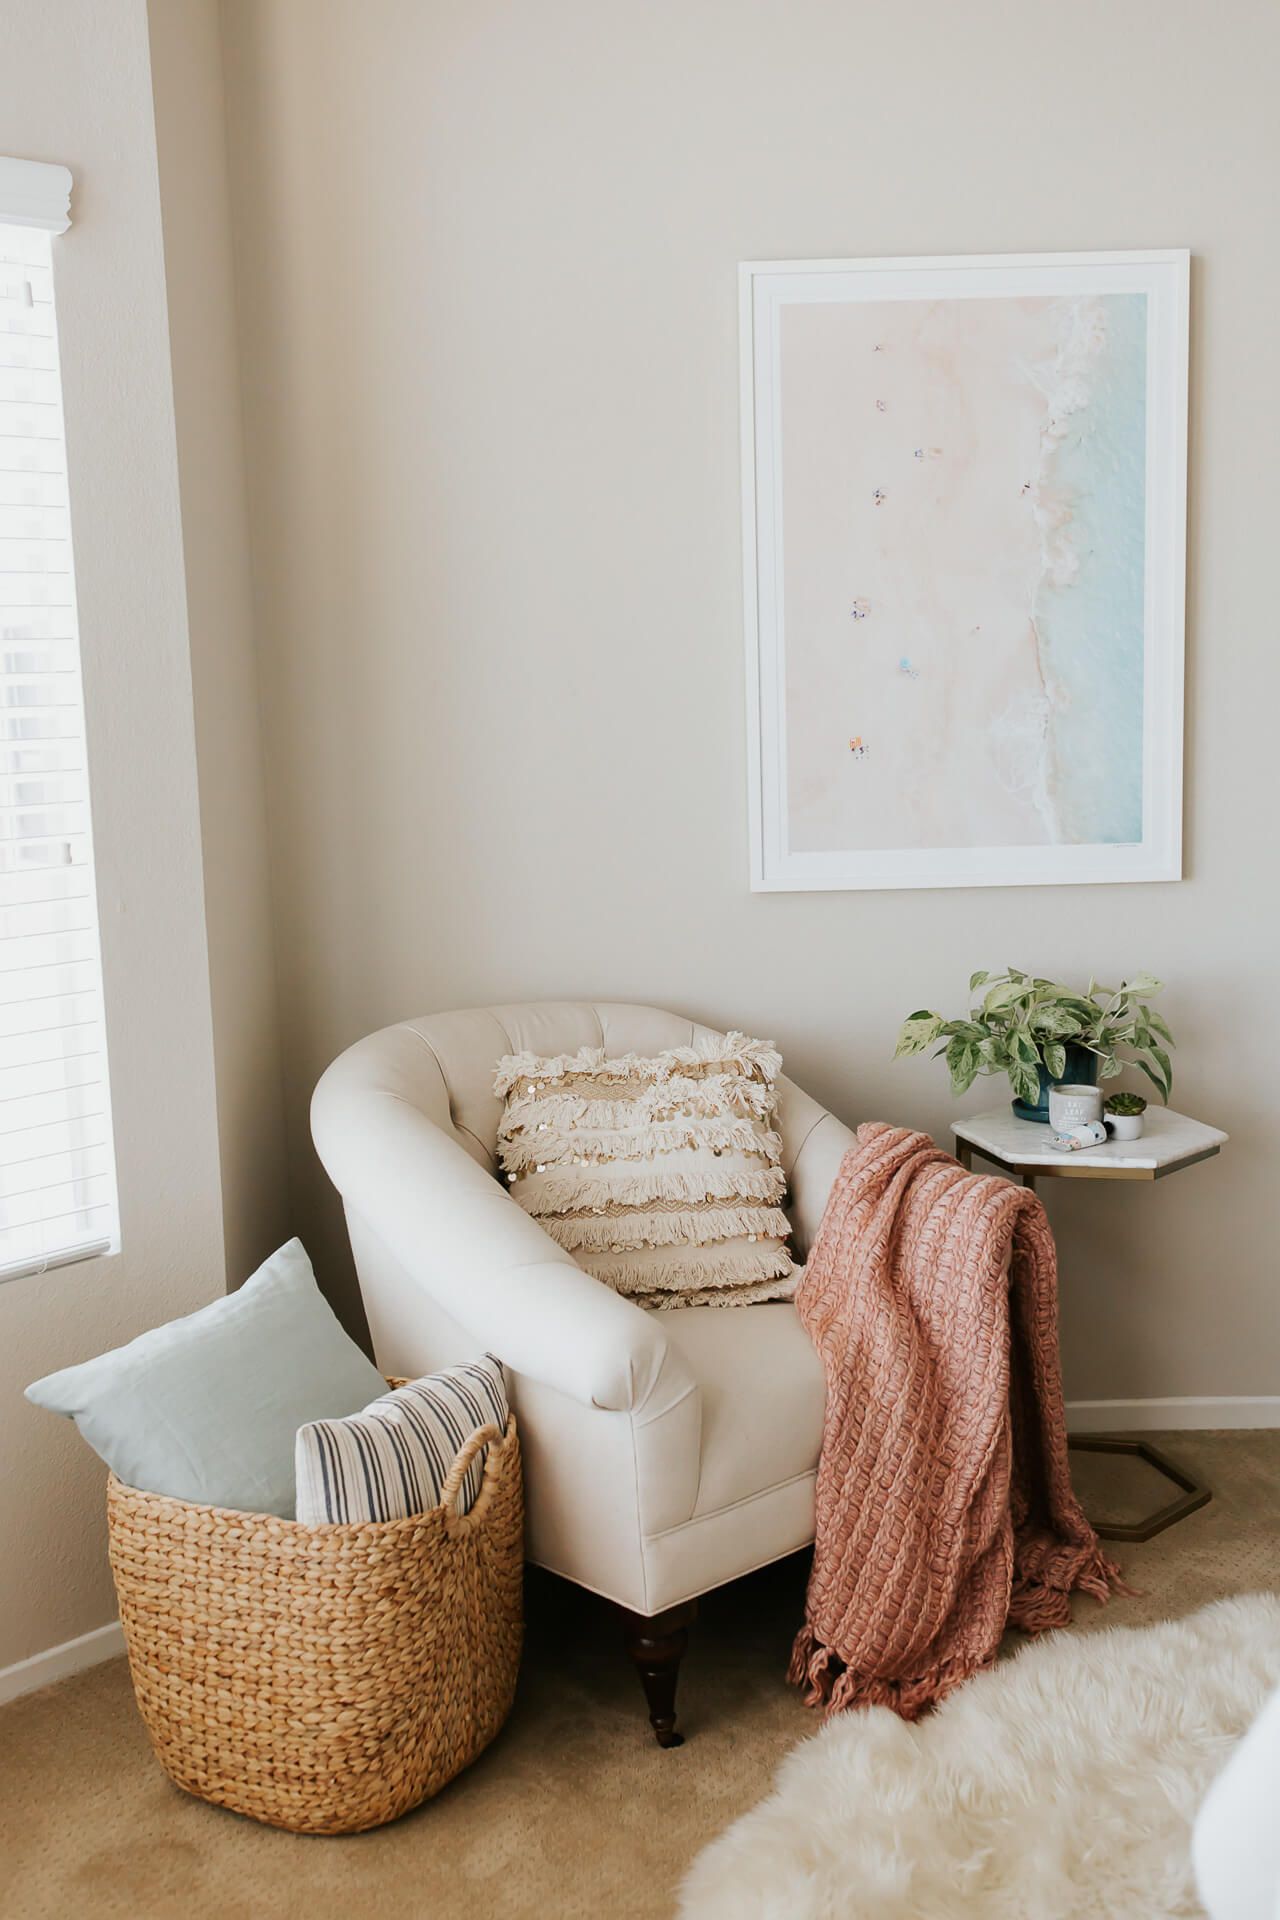 11 Relaxing and Cozy Reading-Corner Ideas